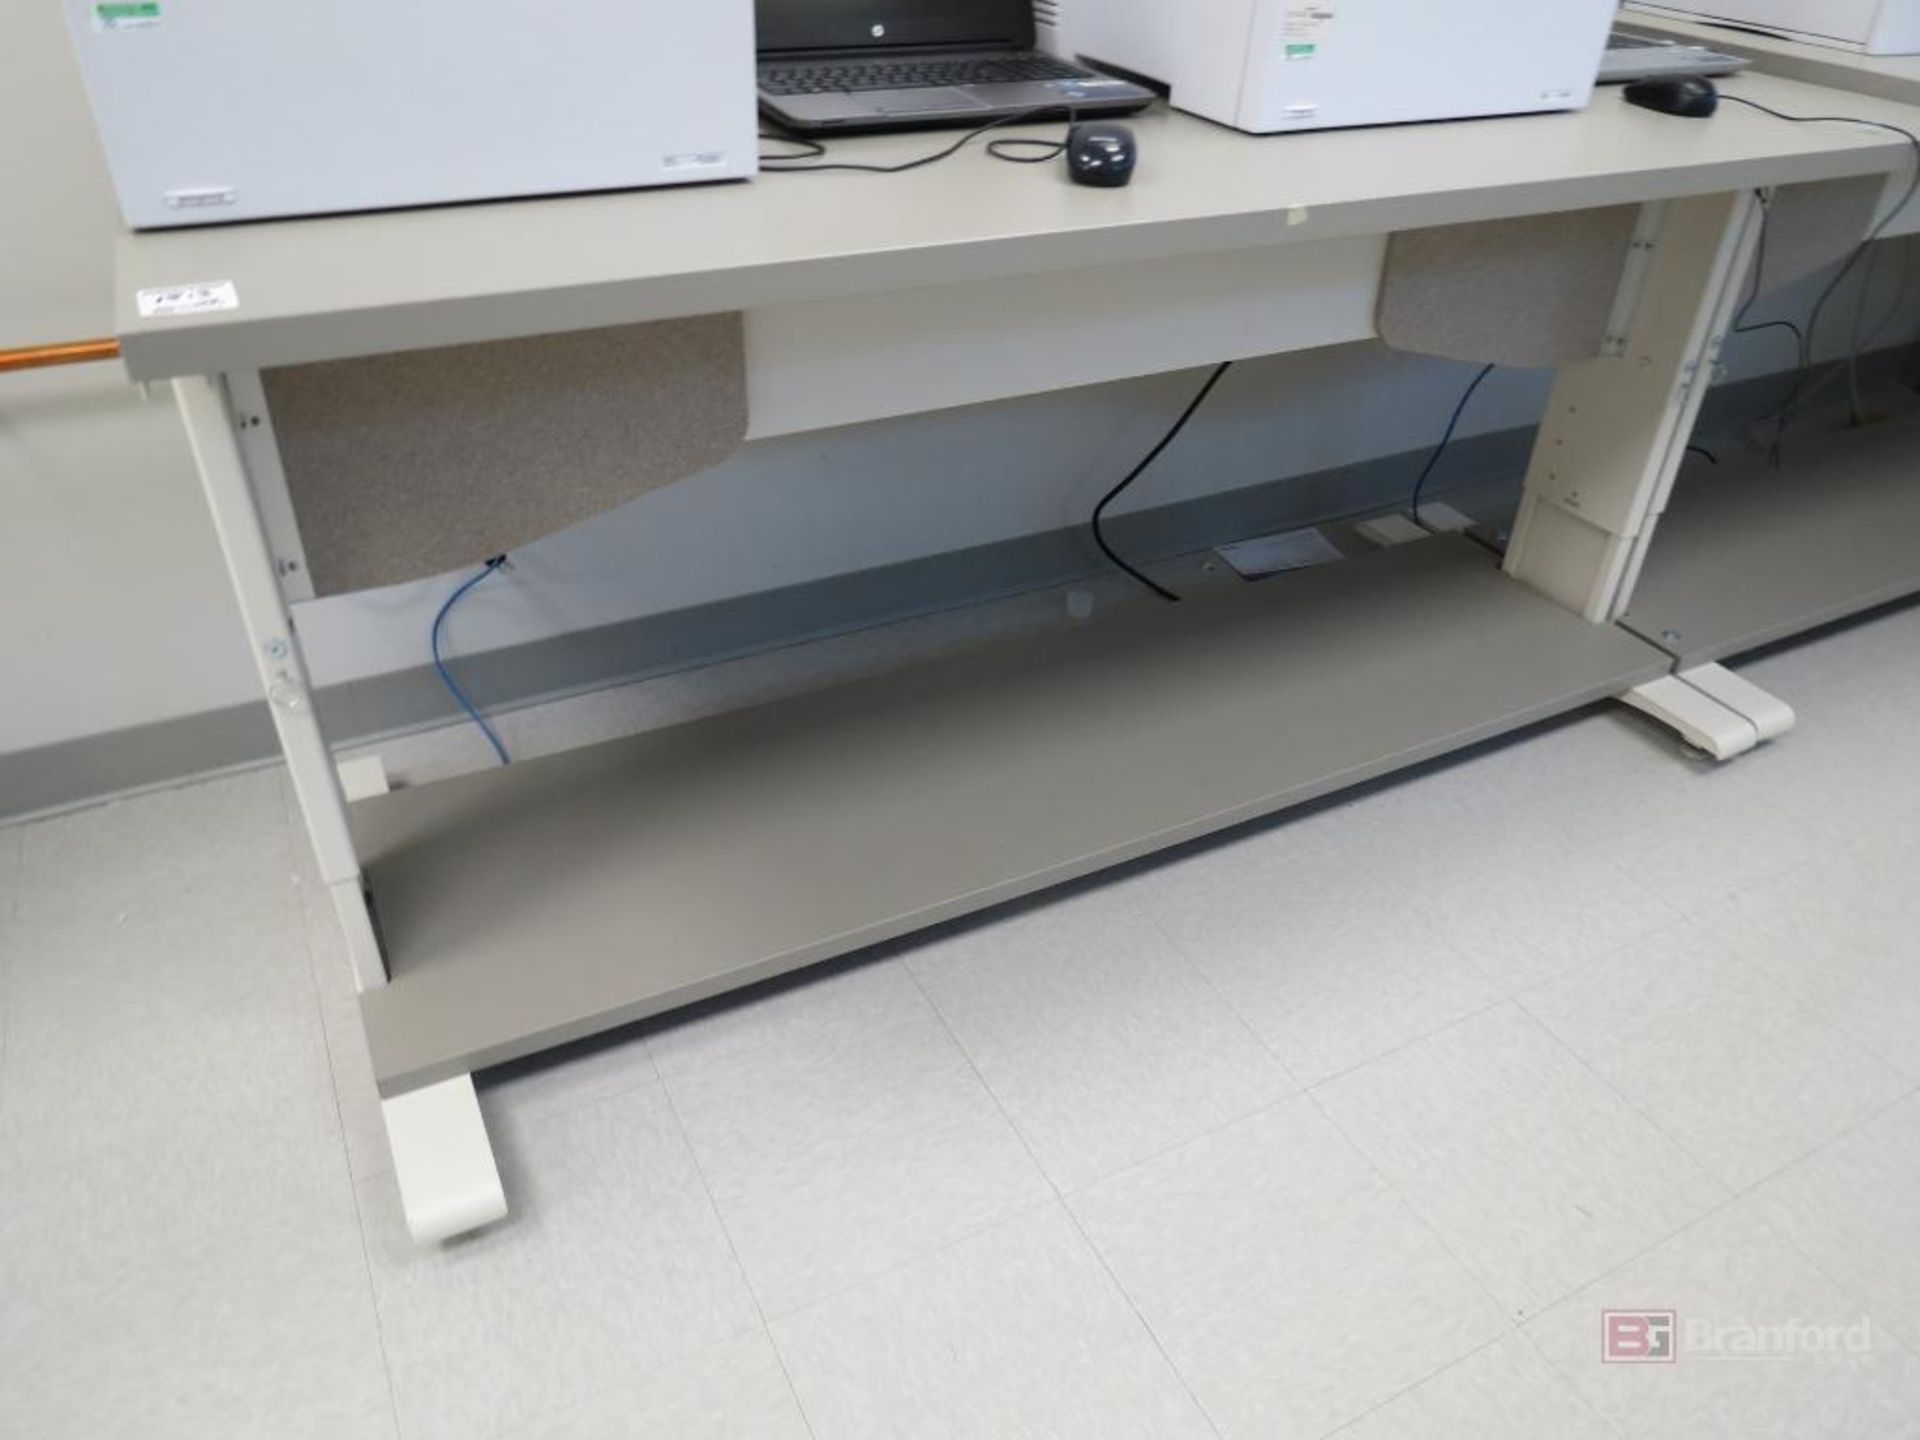 (2) Herman Miller for Healthcare Lab/Medical 6' Wide Benches - Image 2 of 3